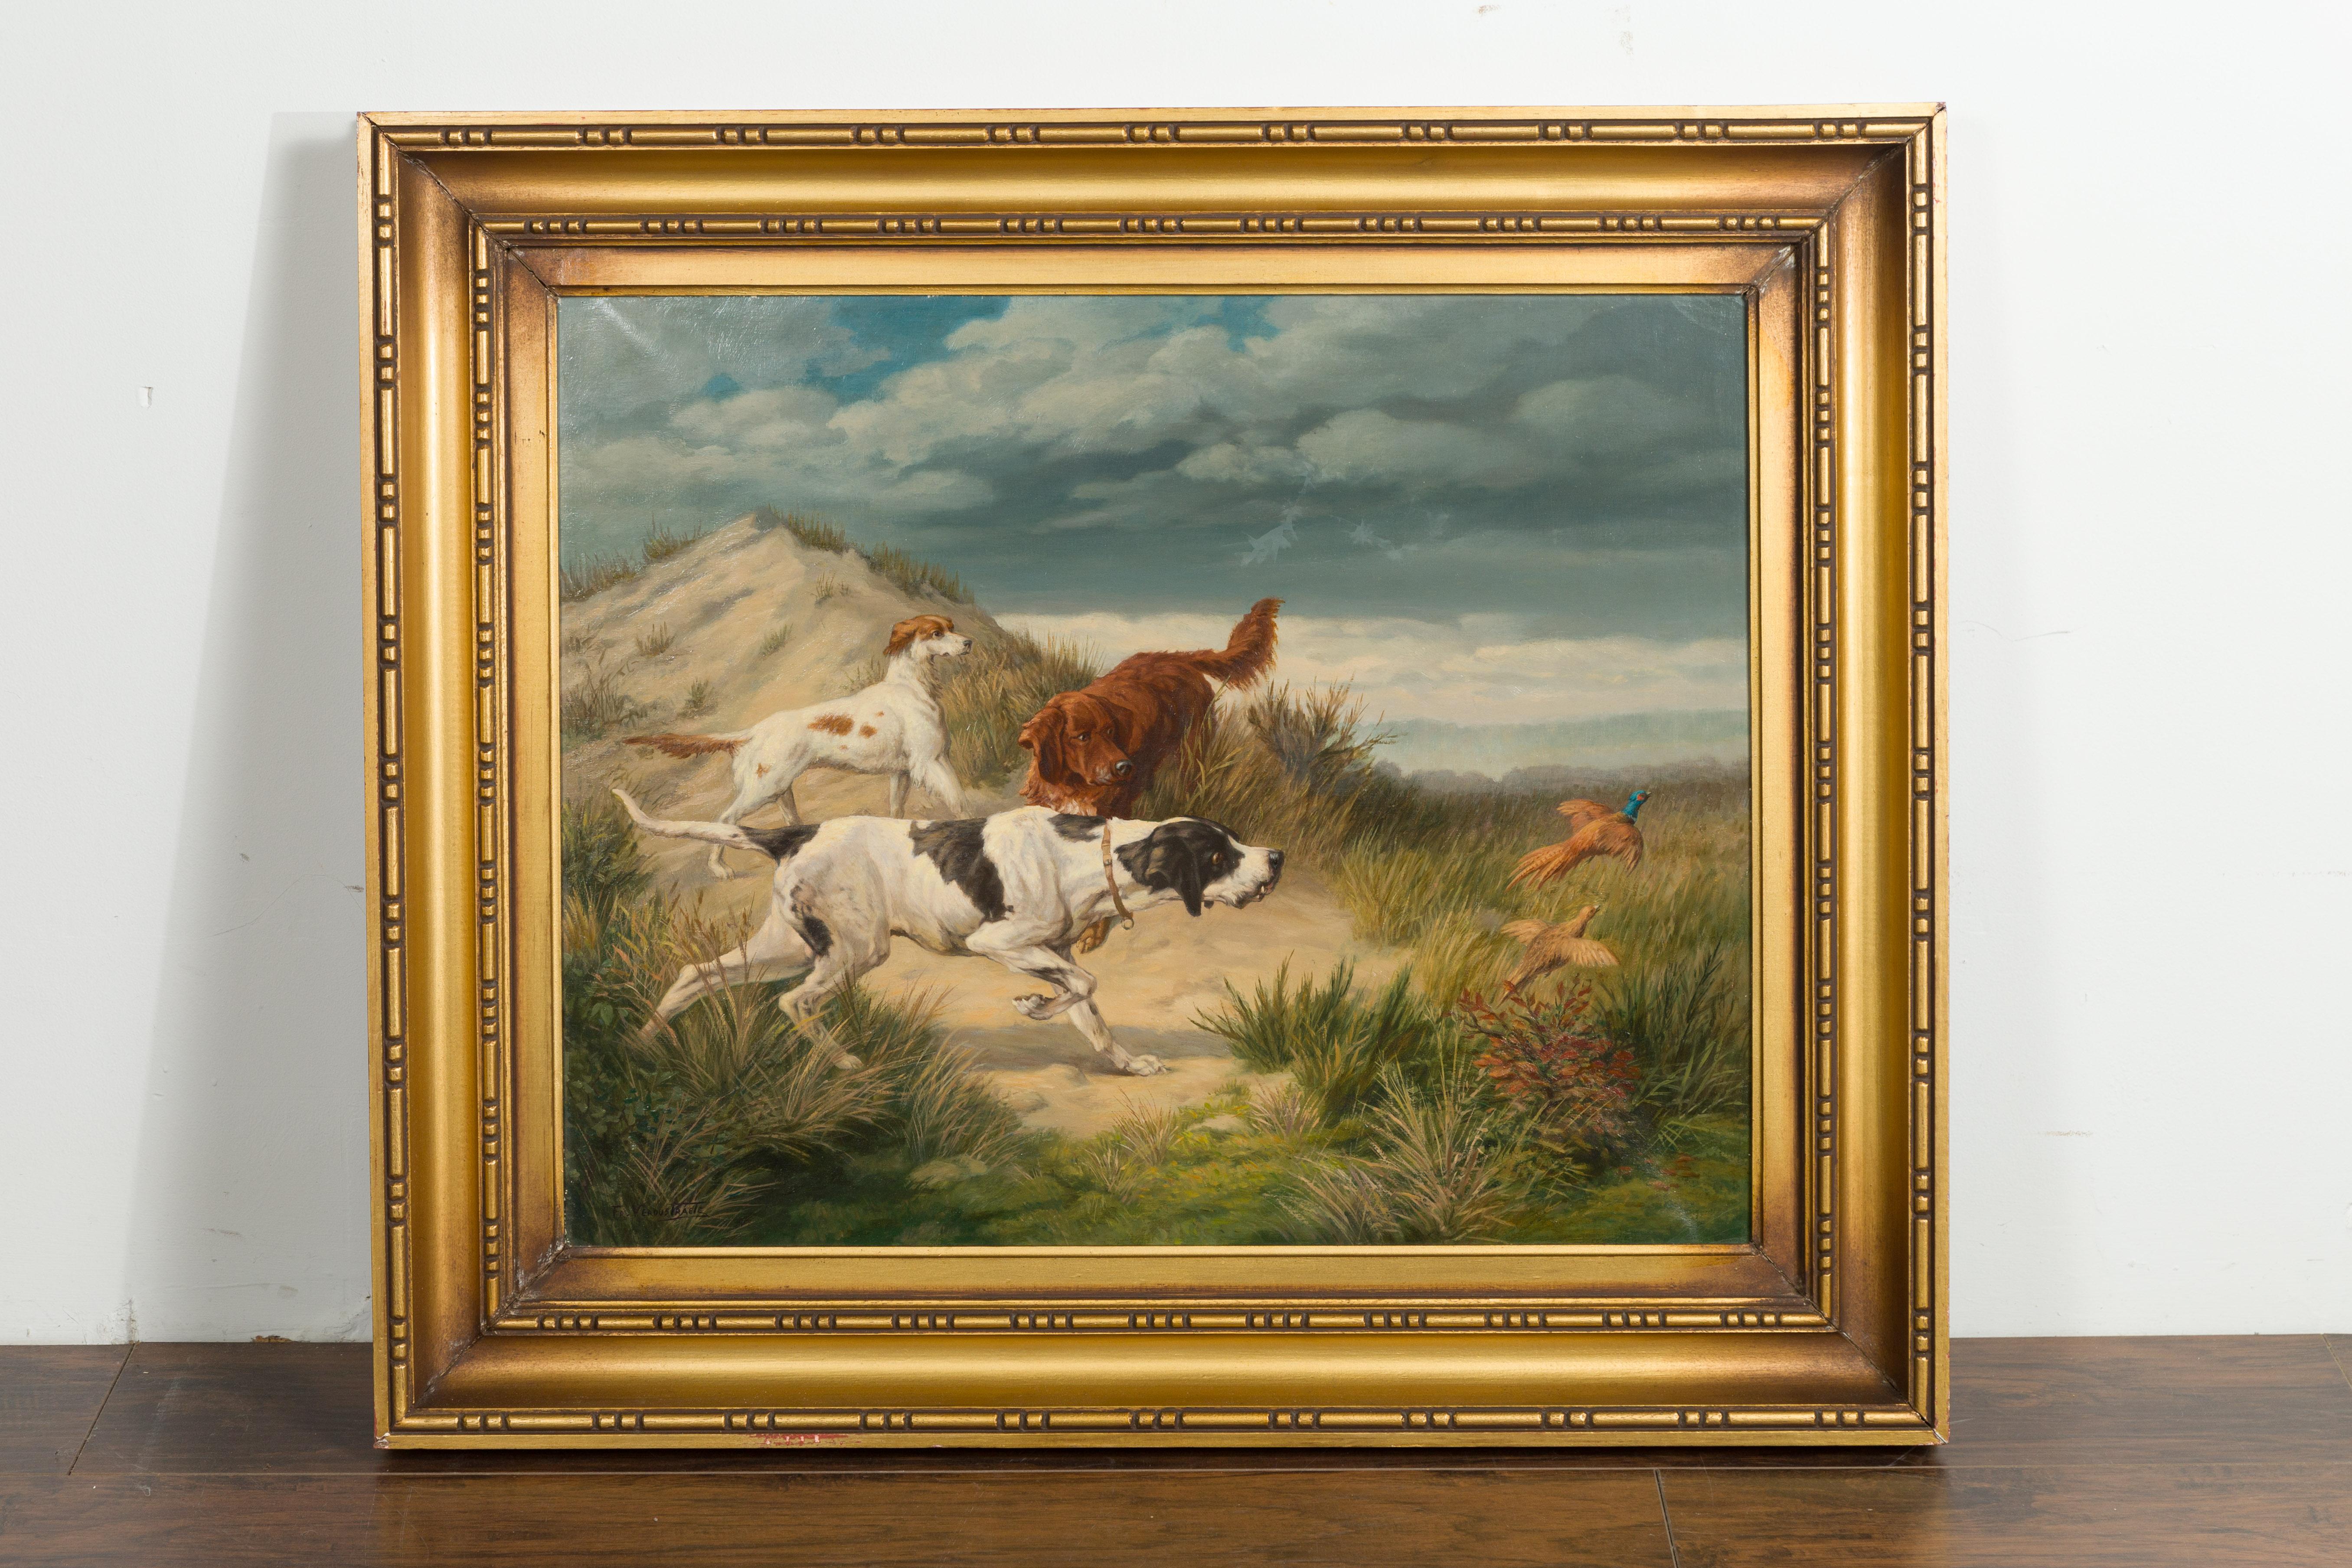 A Belgian oil on canvas dog painting from the late 19th century signed by artist François Veroustraete, titled on the scent in giltwood frame. Created in Belgium during the last quarter of the 19th century, this oil on canvas painting is by the hand